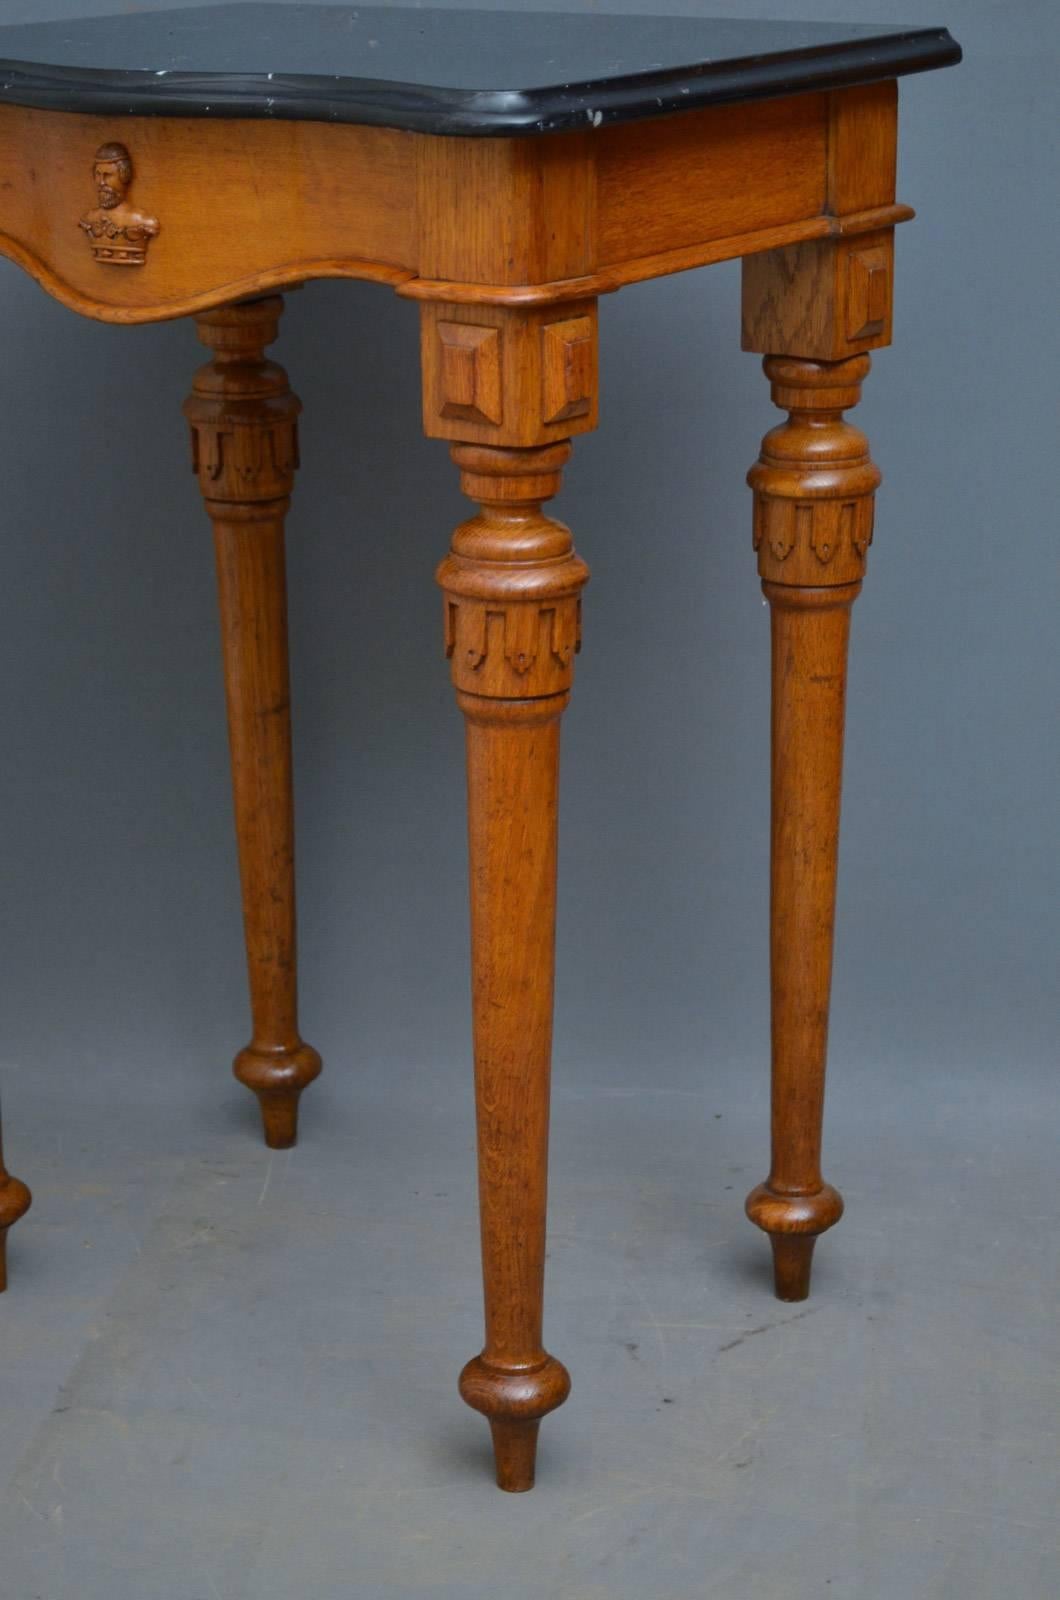 Stylish Victorian Console Table in Oak In Excellent Condition For Sale In Whaley Bridge, GB